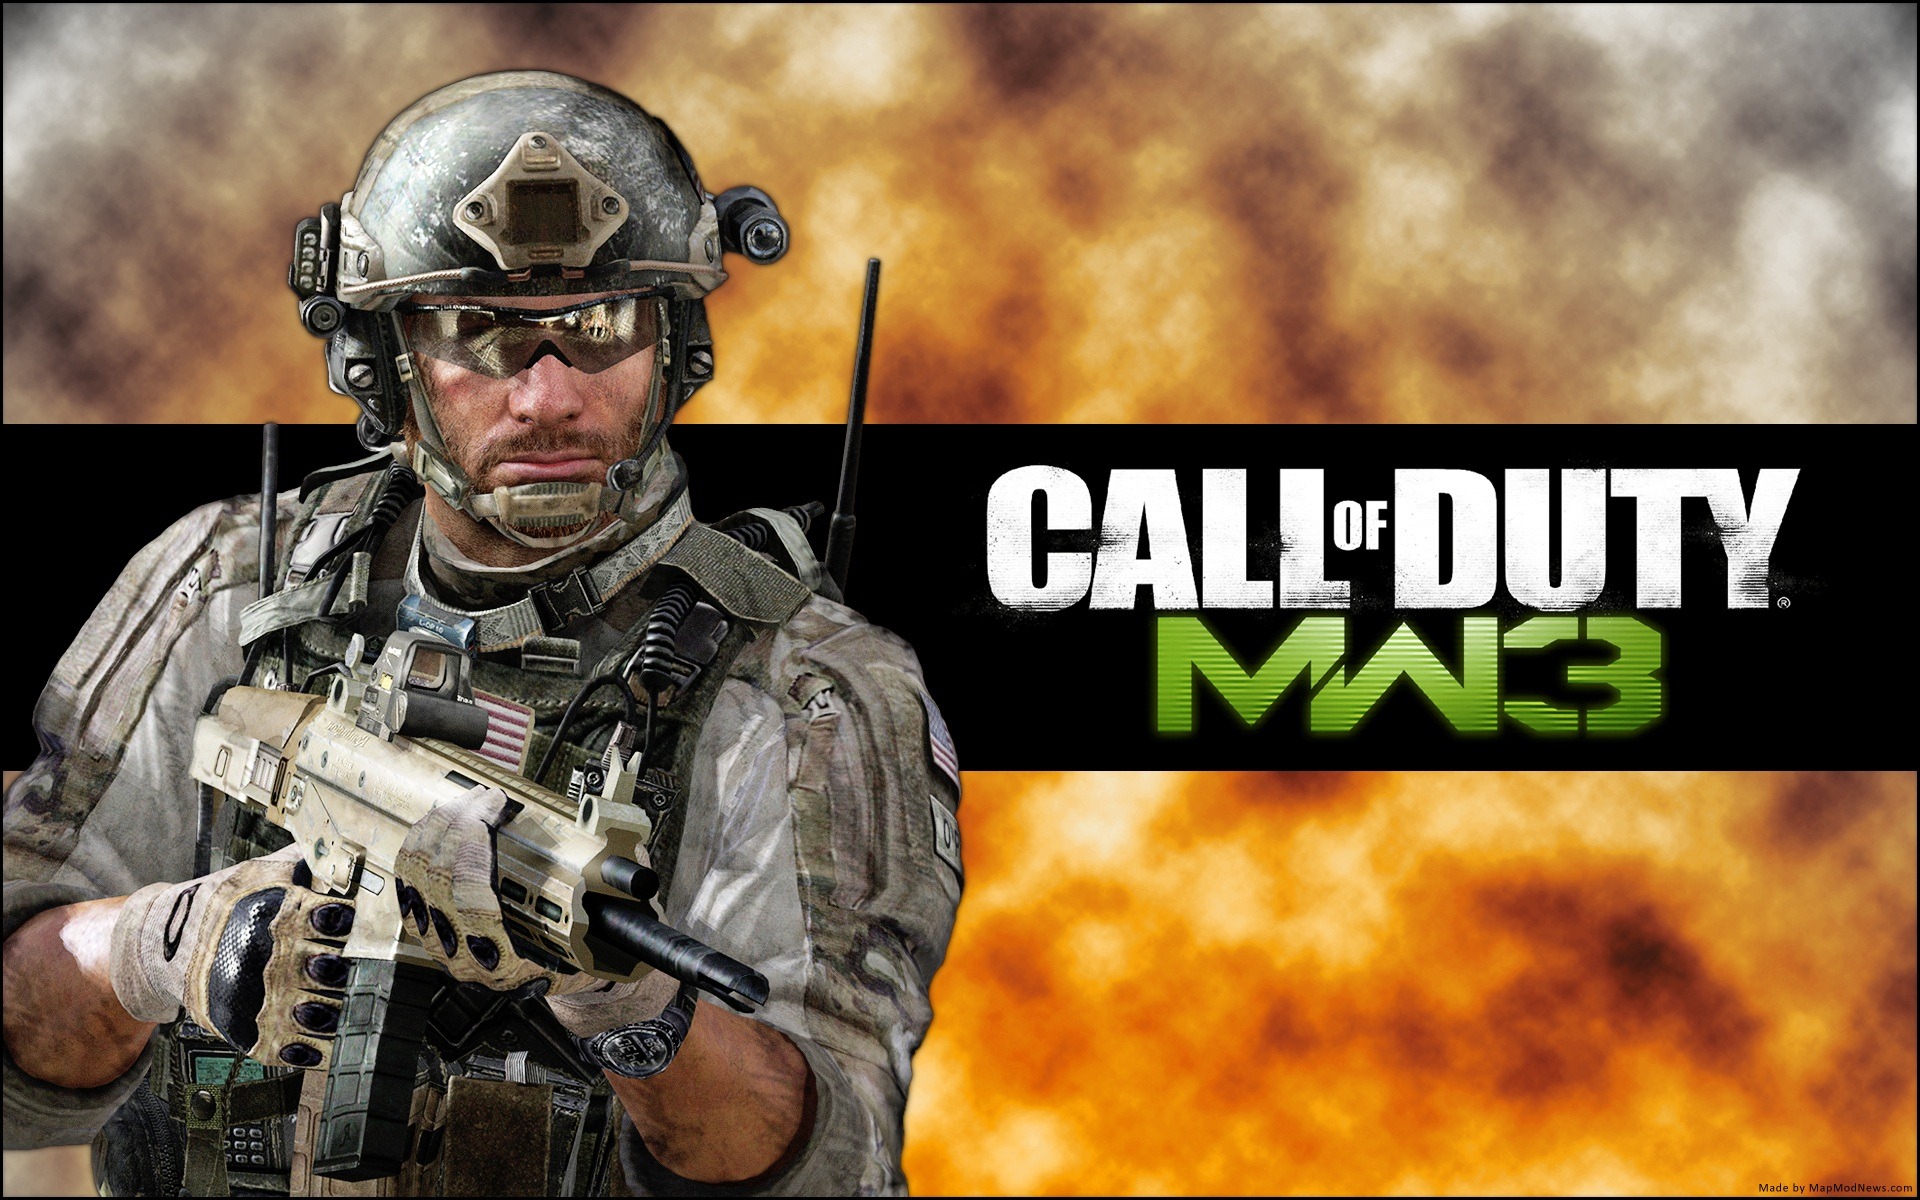 Call of Duty: MW3 wallpapers HD #14 - 1920x1200